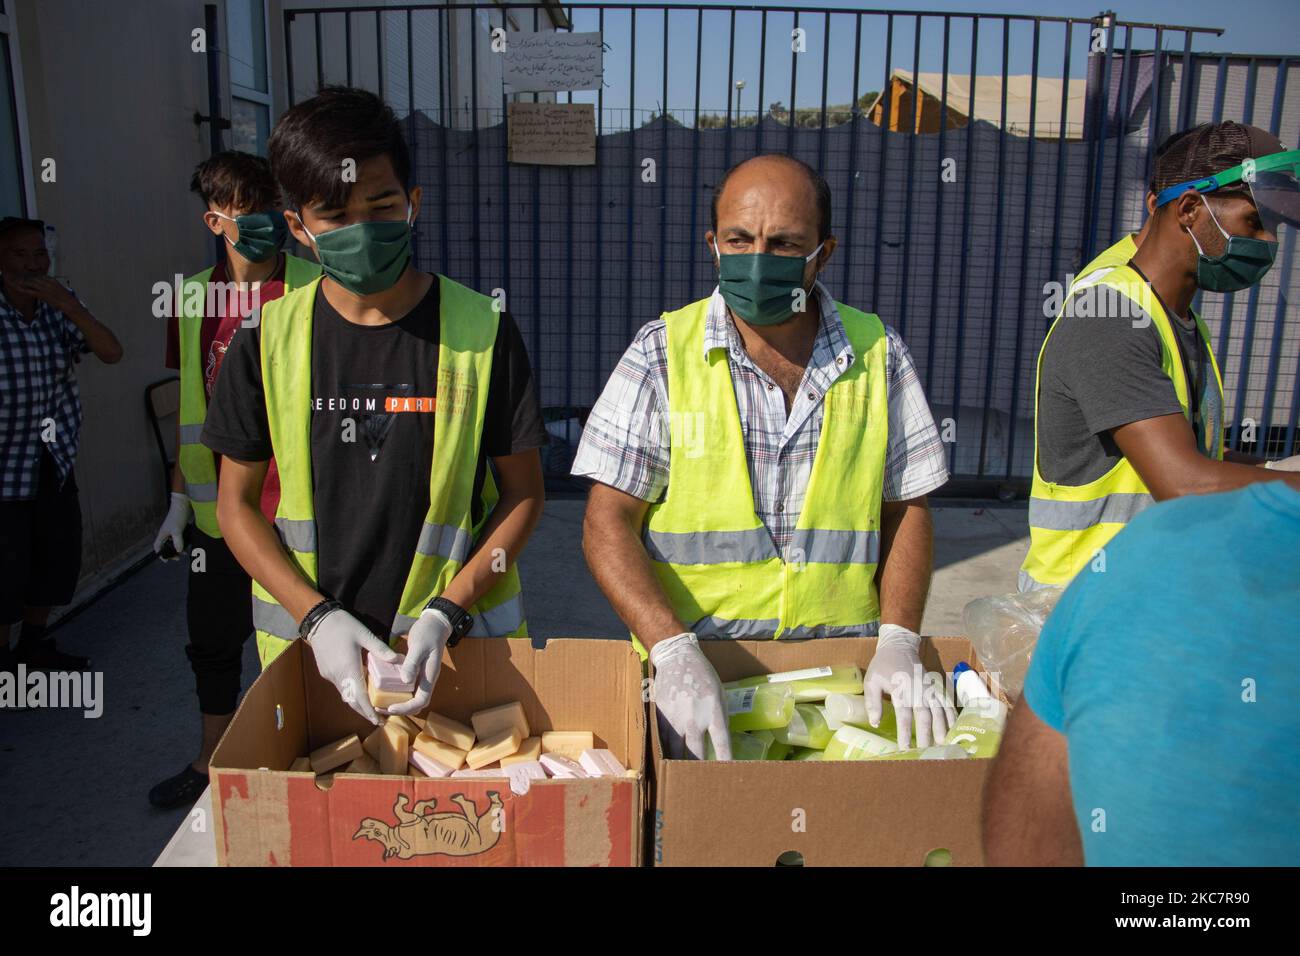 People of the organization and volunteers with all the safety preventive measures like facemask, faceshield and gloves are distirbuting humanitarian Aid to Asylum Seekers from Team Humanity Denmark NGO after the refugees and migrants have their body temperature tested, in order to prevent people to enter the facility with the possibility of spreading the pandemic, the Covid-19 Coronavirus. The facility is near the former Moria hotspot camp. More than 10.000 Asylum Seekers are homeless and helpless, resulting sleeping and living roadside without any shelter, food, running water supply, facility Stock Photo